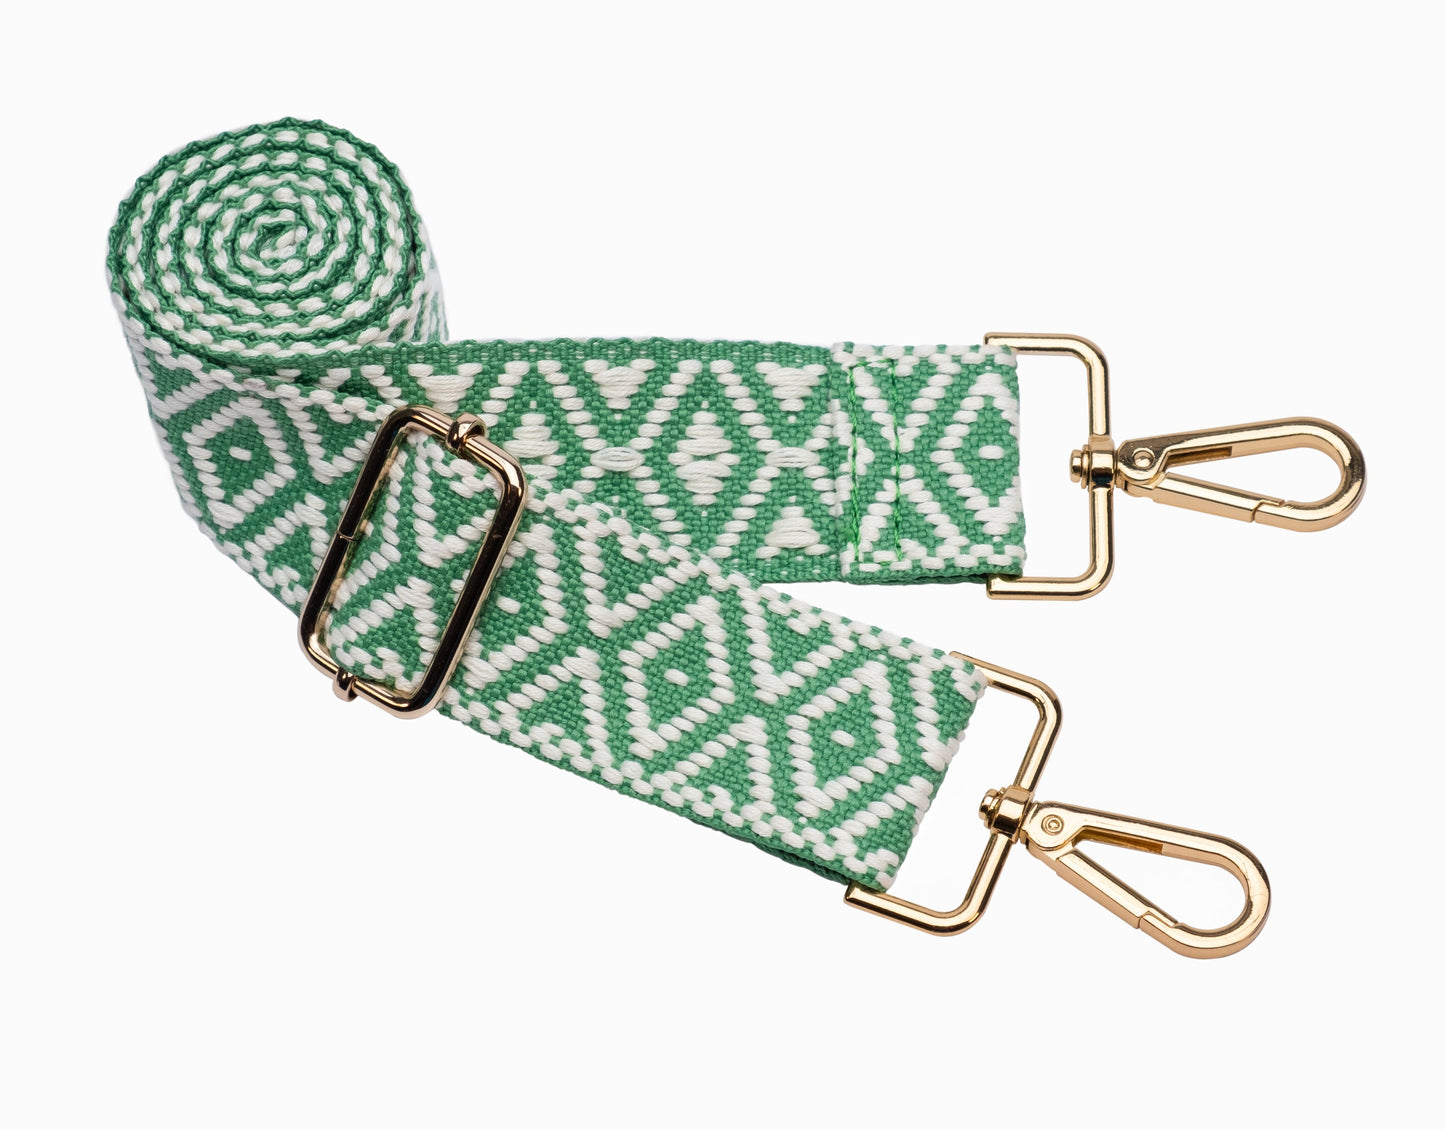 Kelly Green and Cream Woven Strap